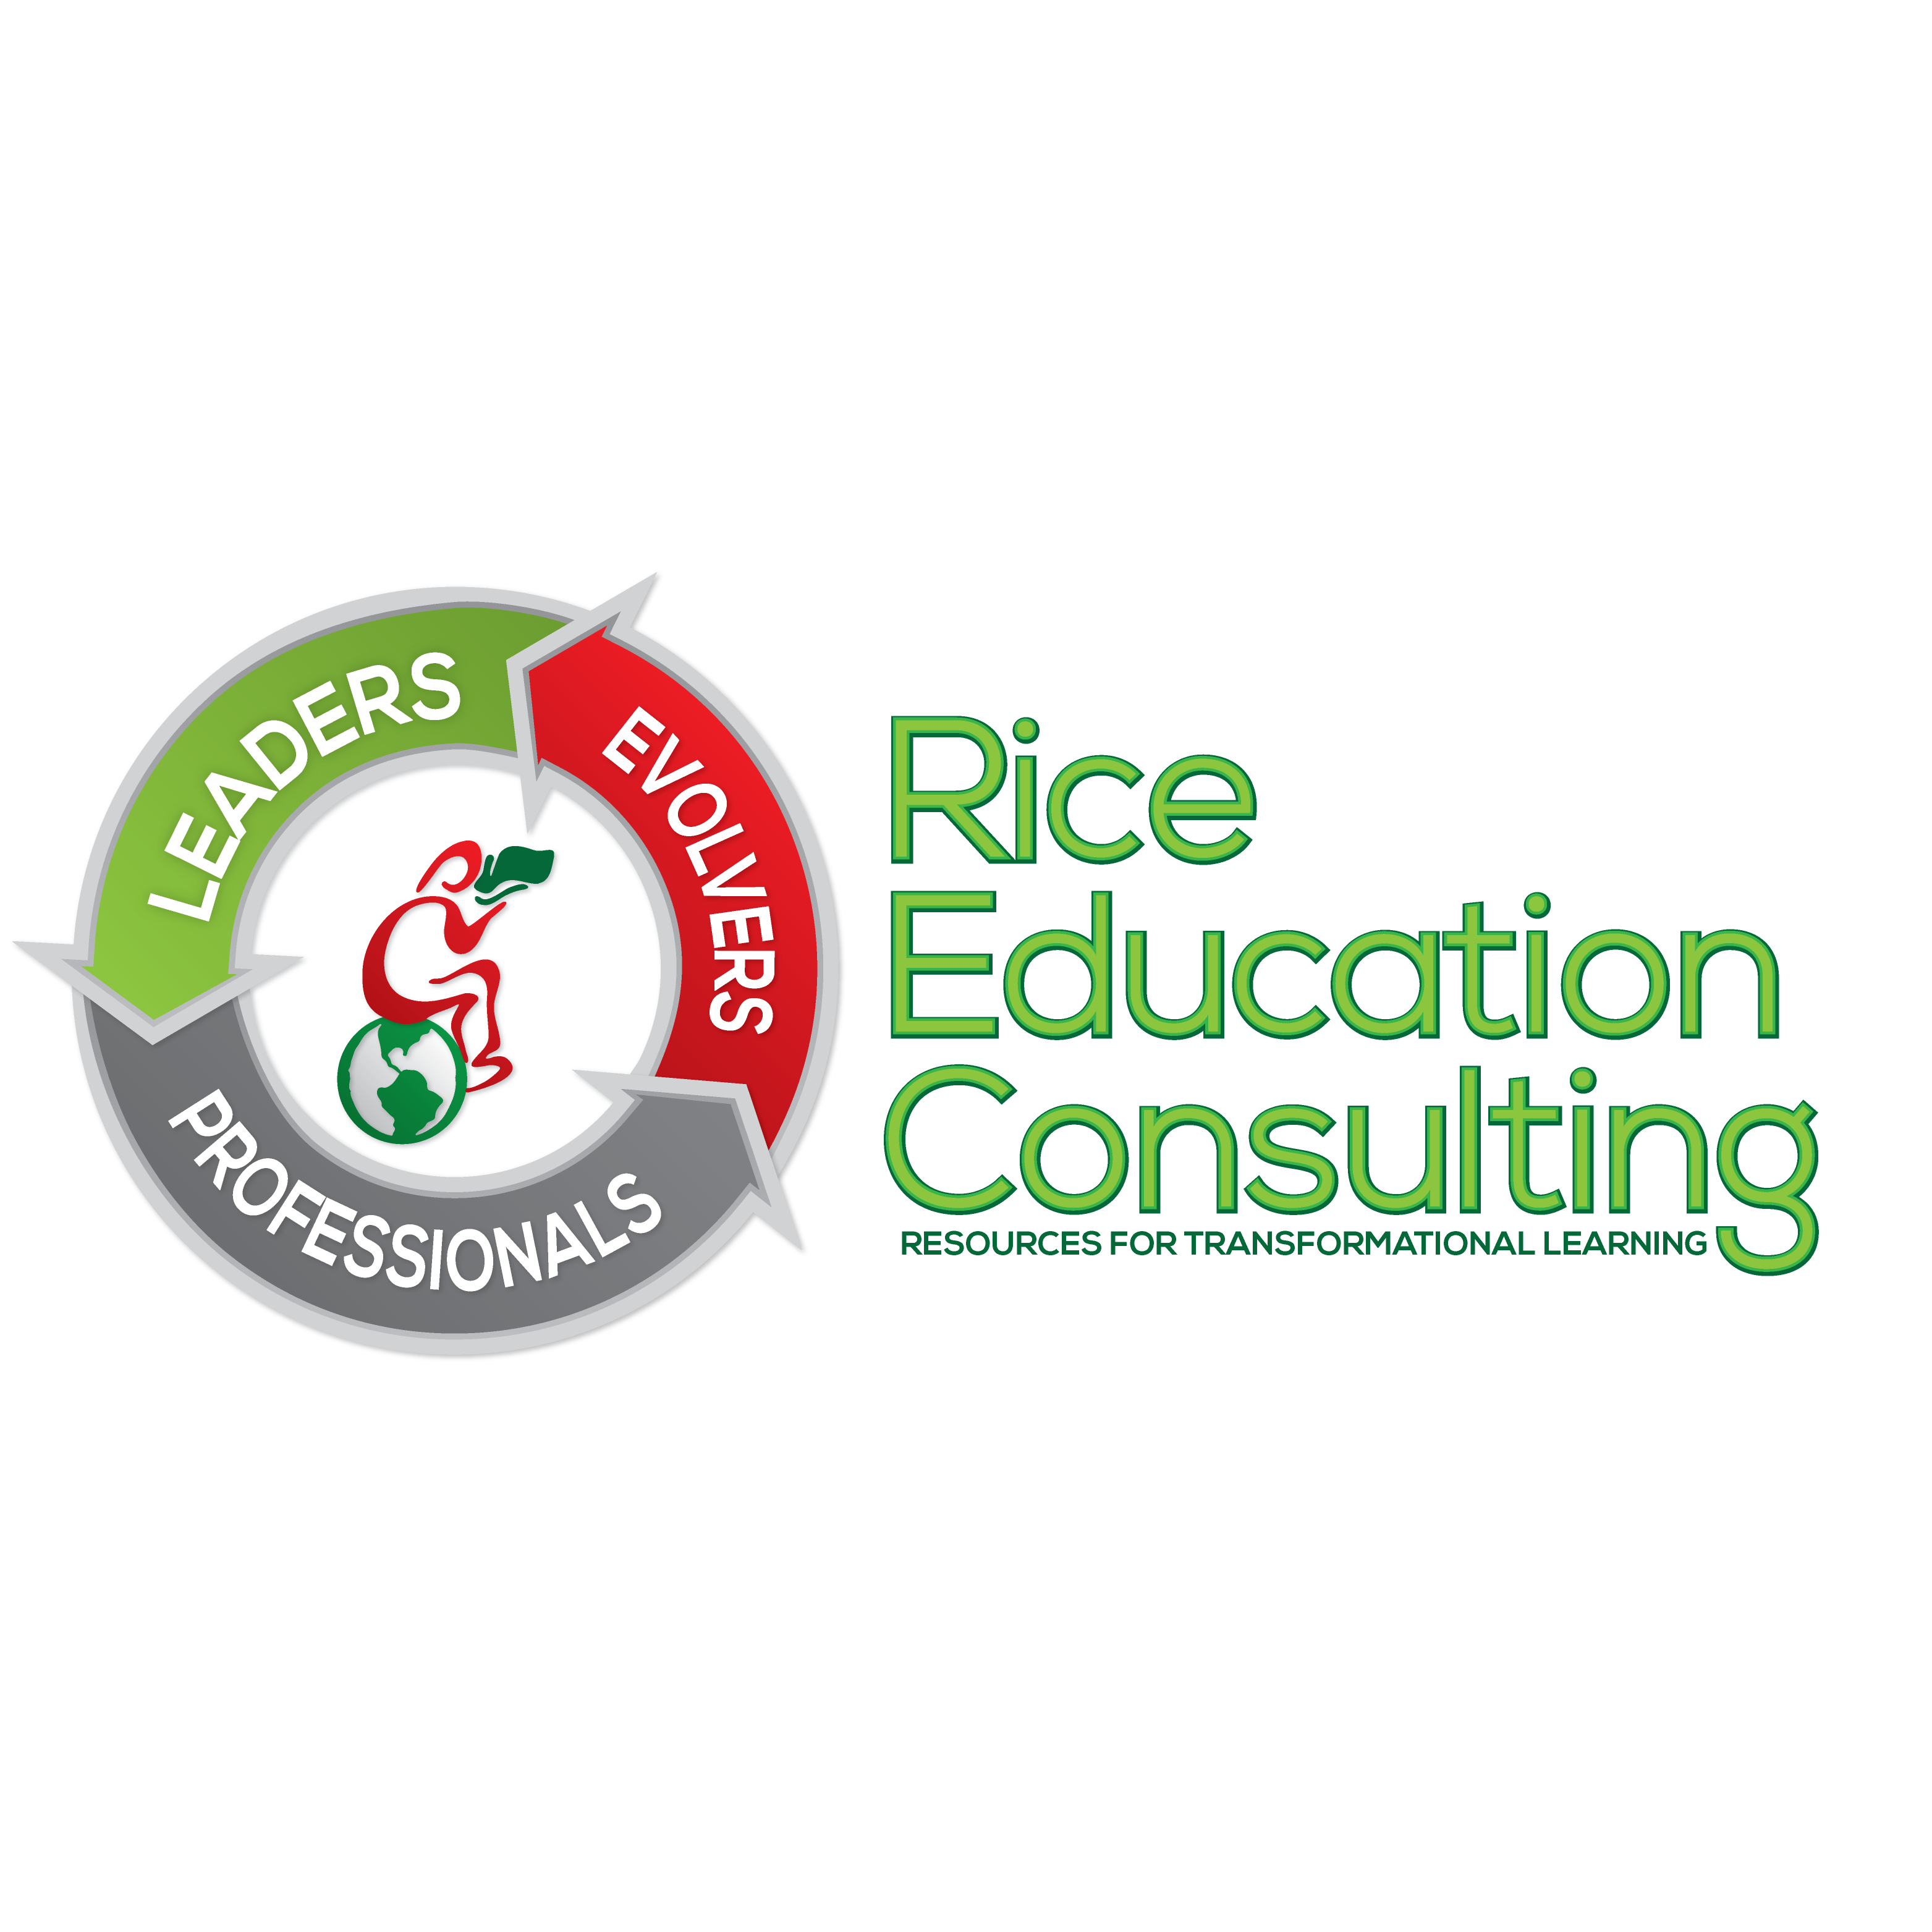 Rice Education Consulting logo